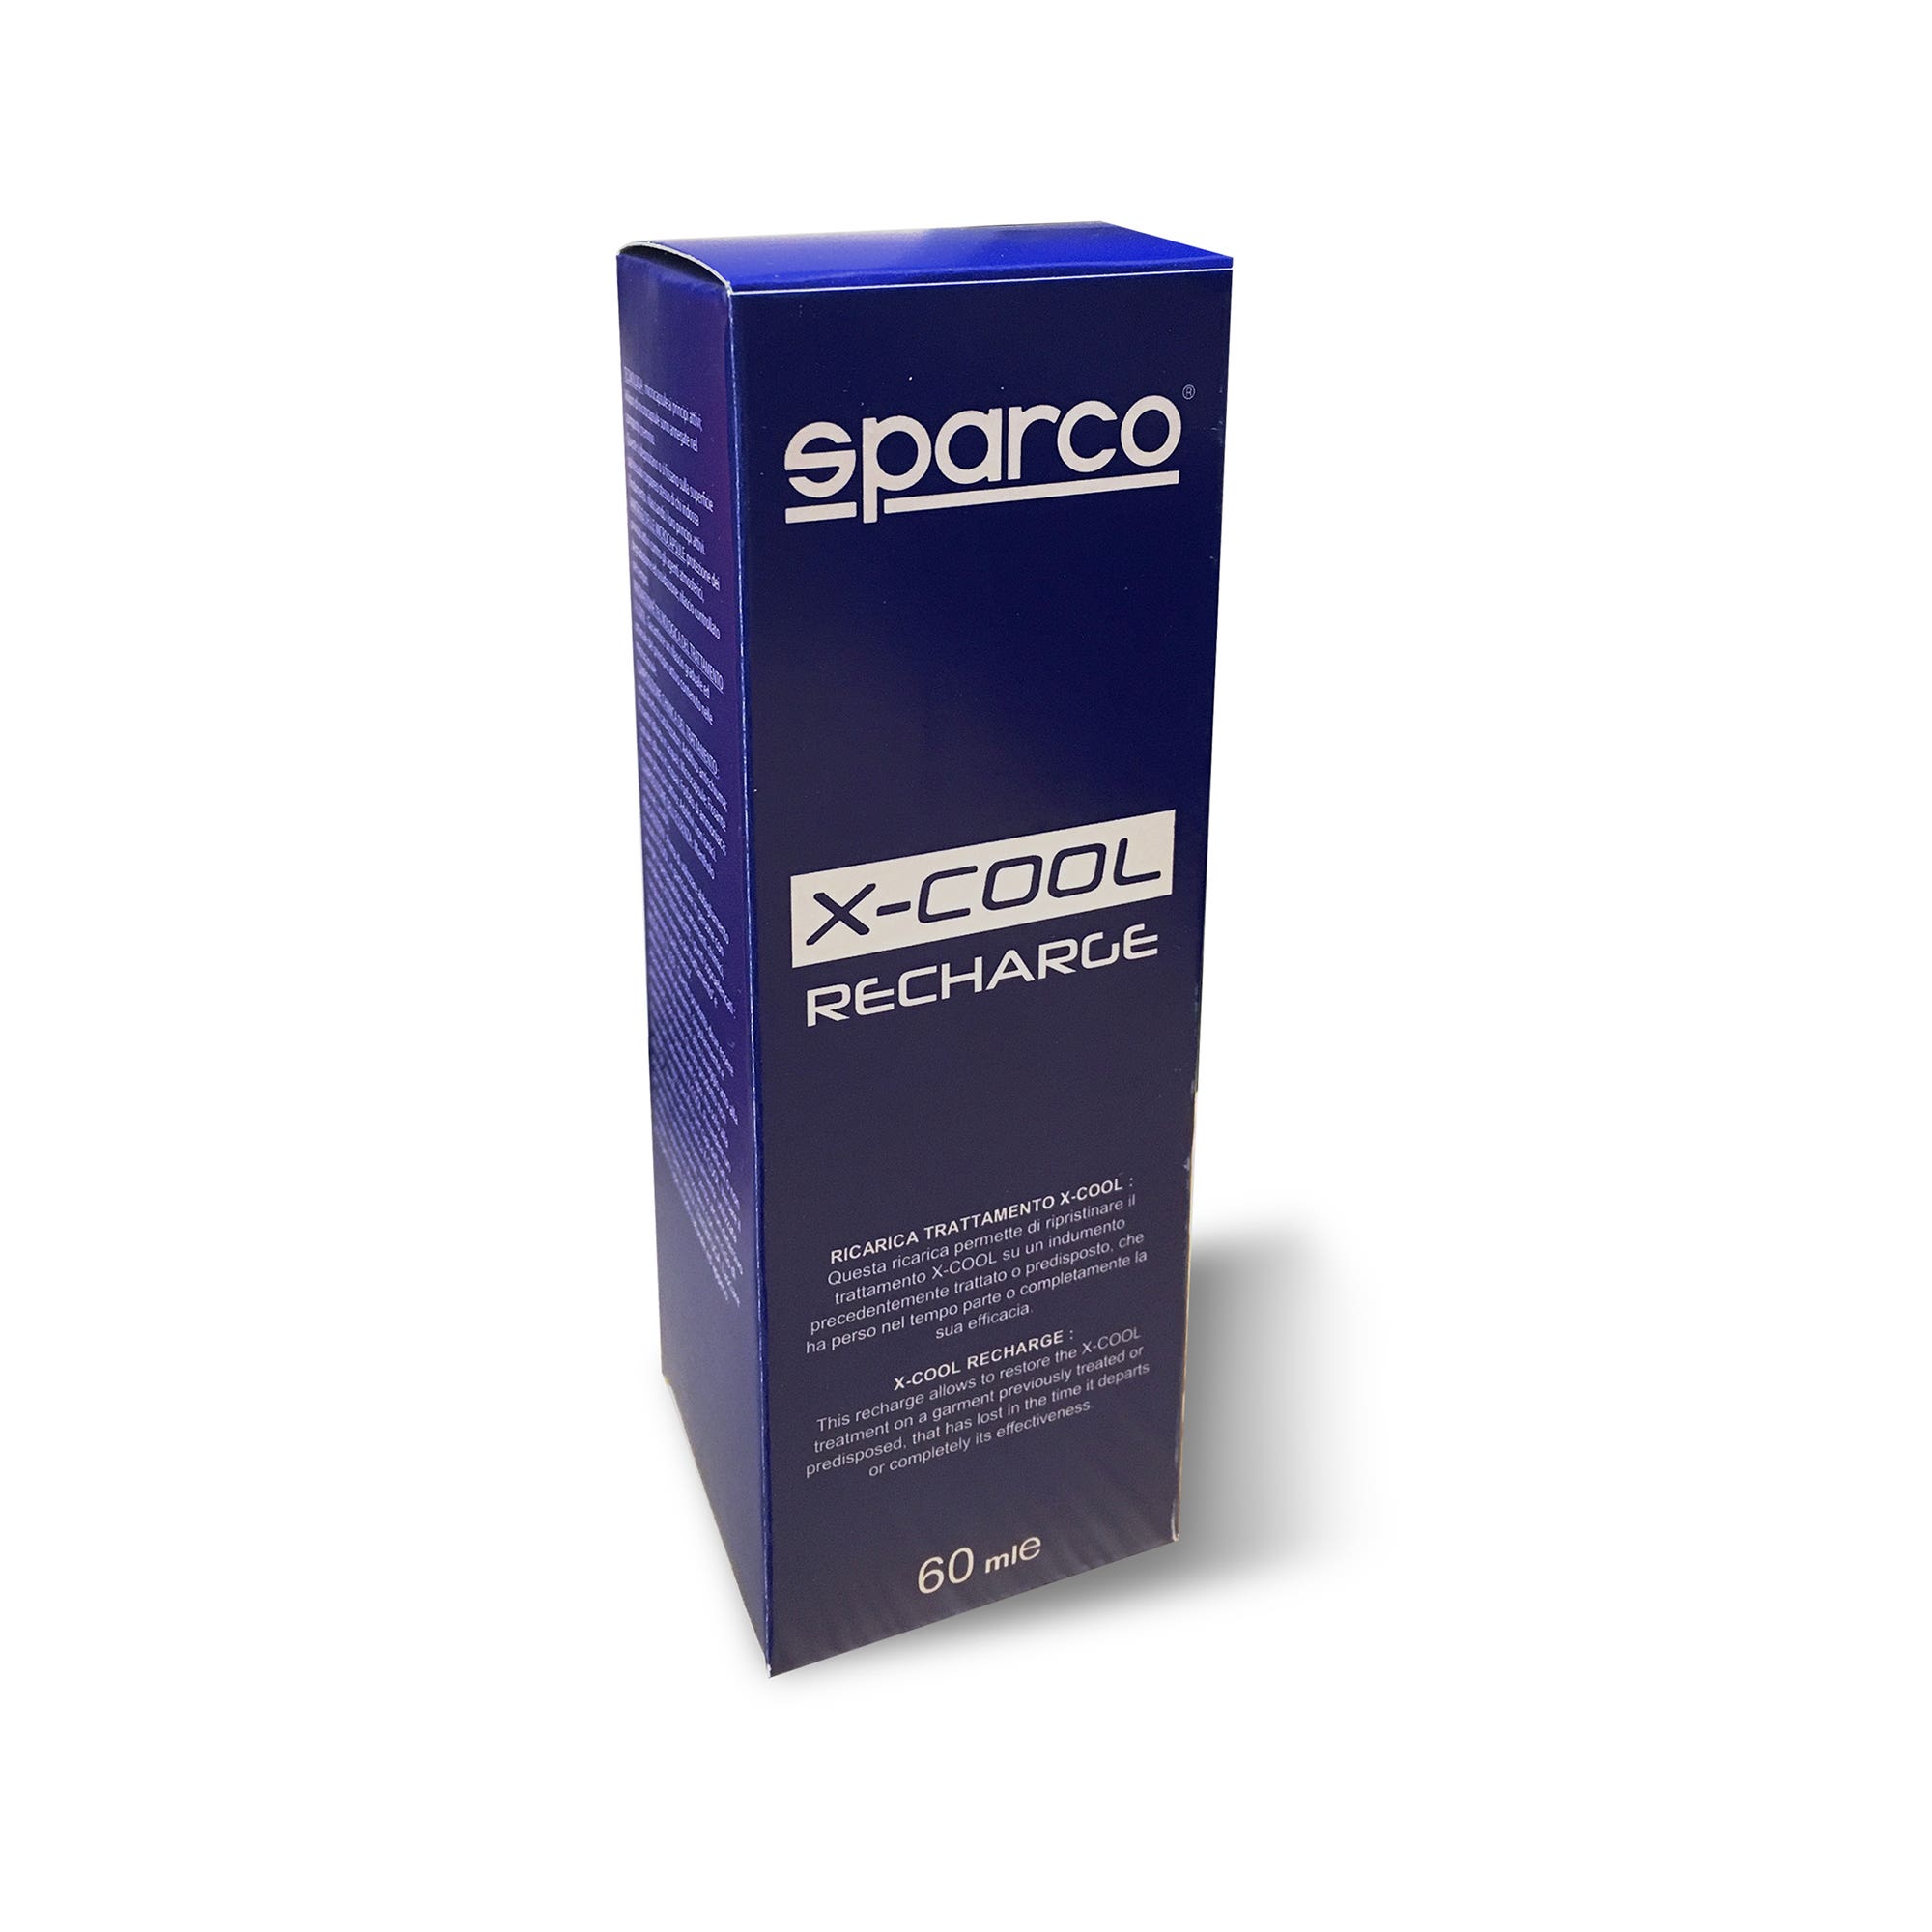 X-COOL RECHARGE - Sparco Shop